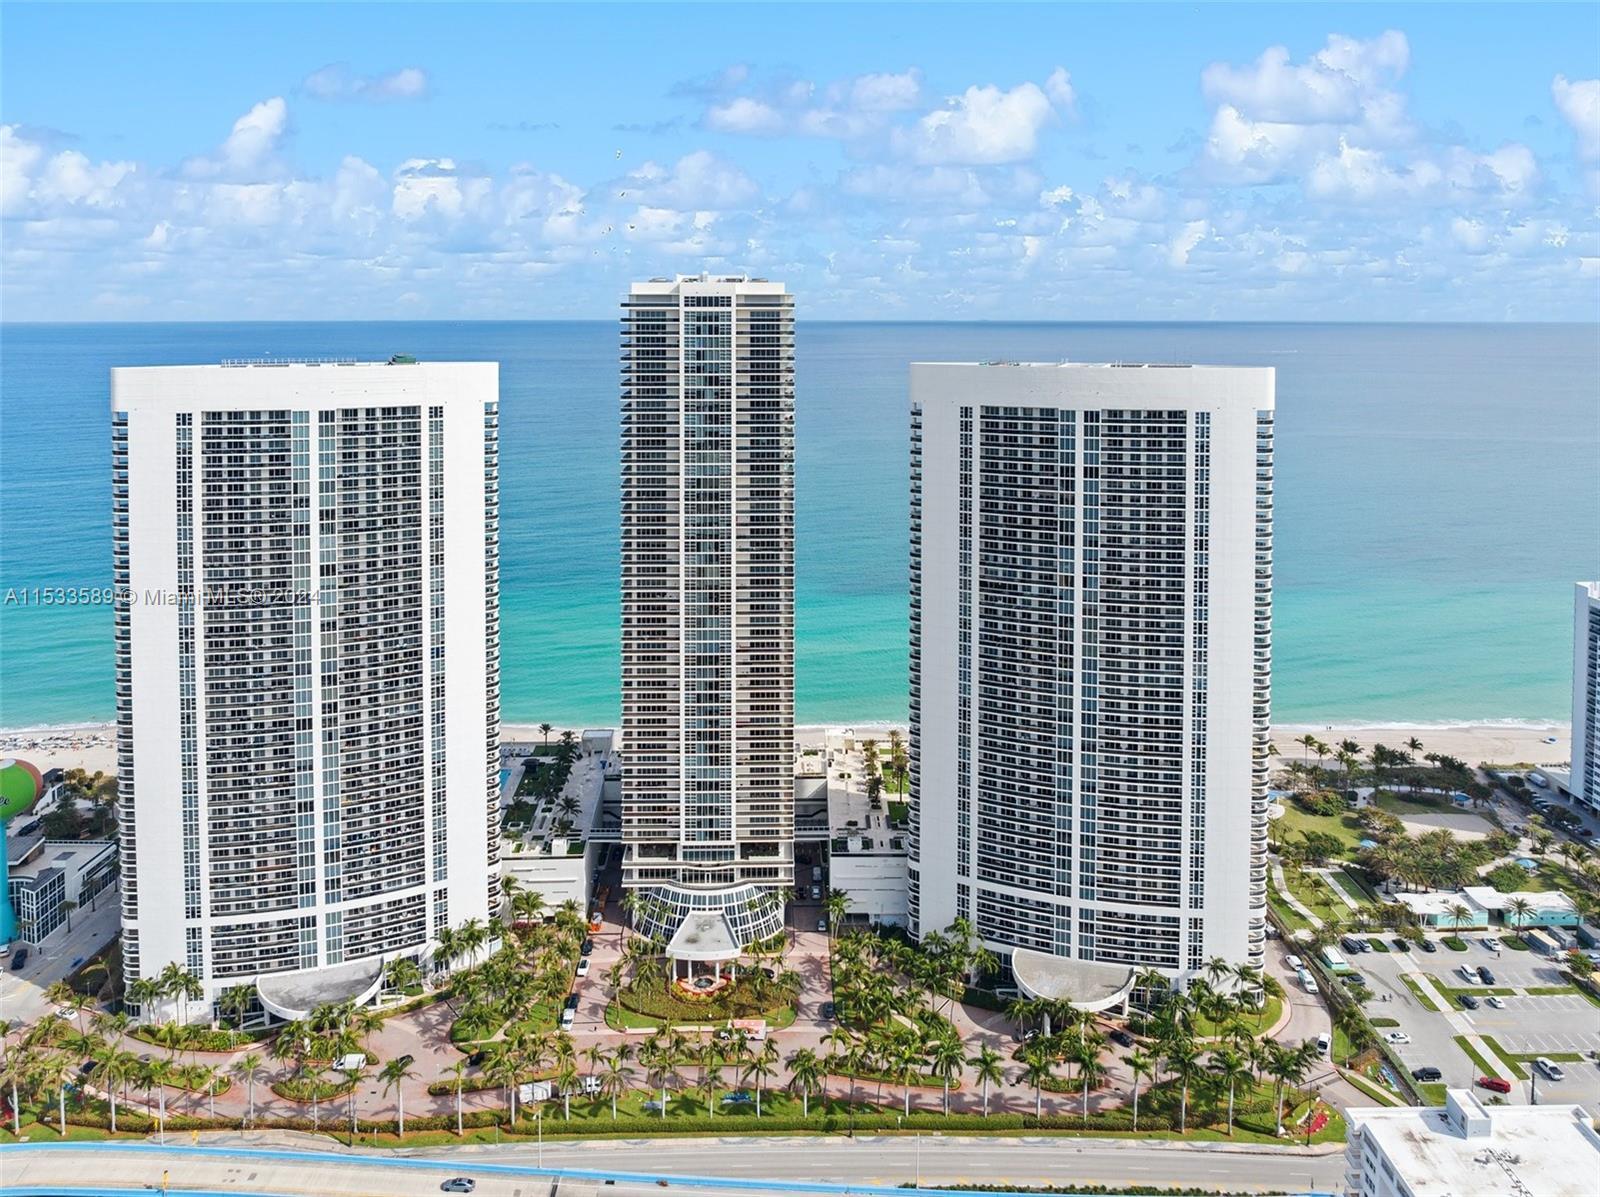 Live the Ultimate 5 Star Oceanfront Lifestyle at The Beach Club: luxurious condos, stunning views, e